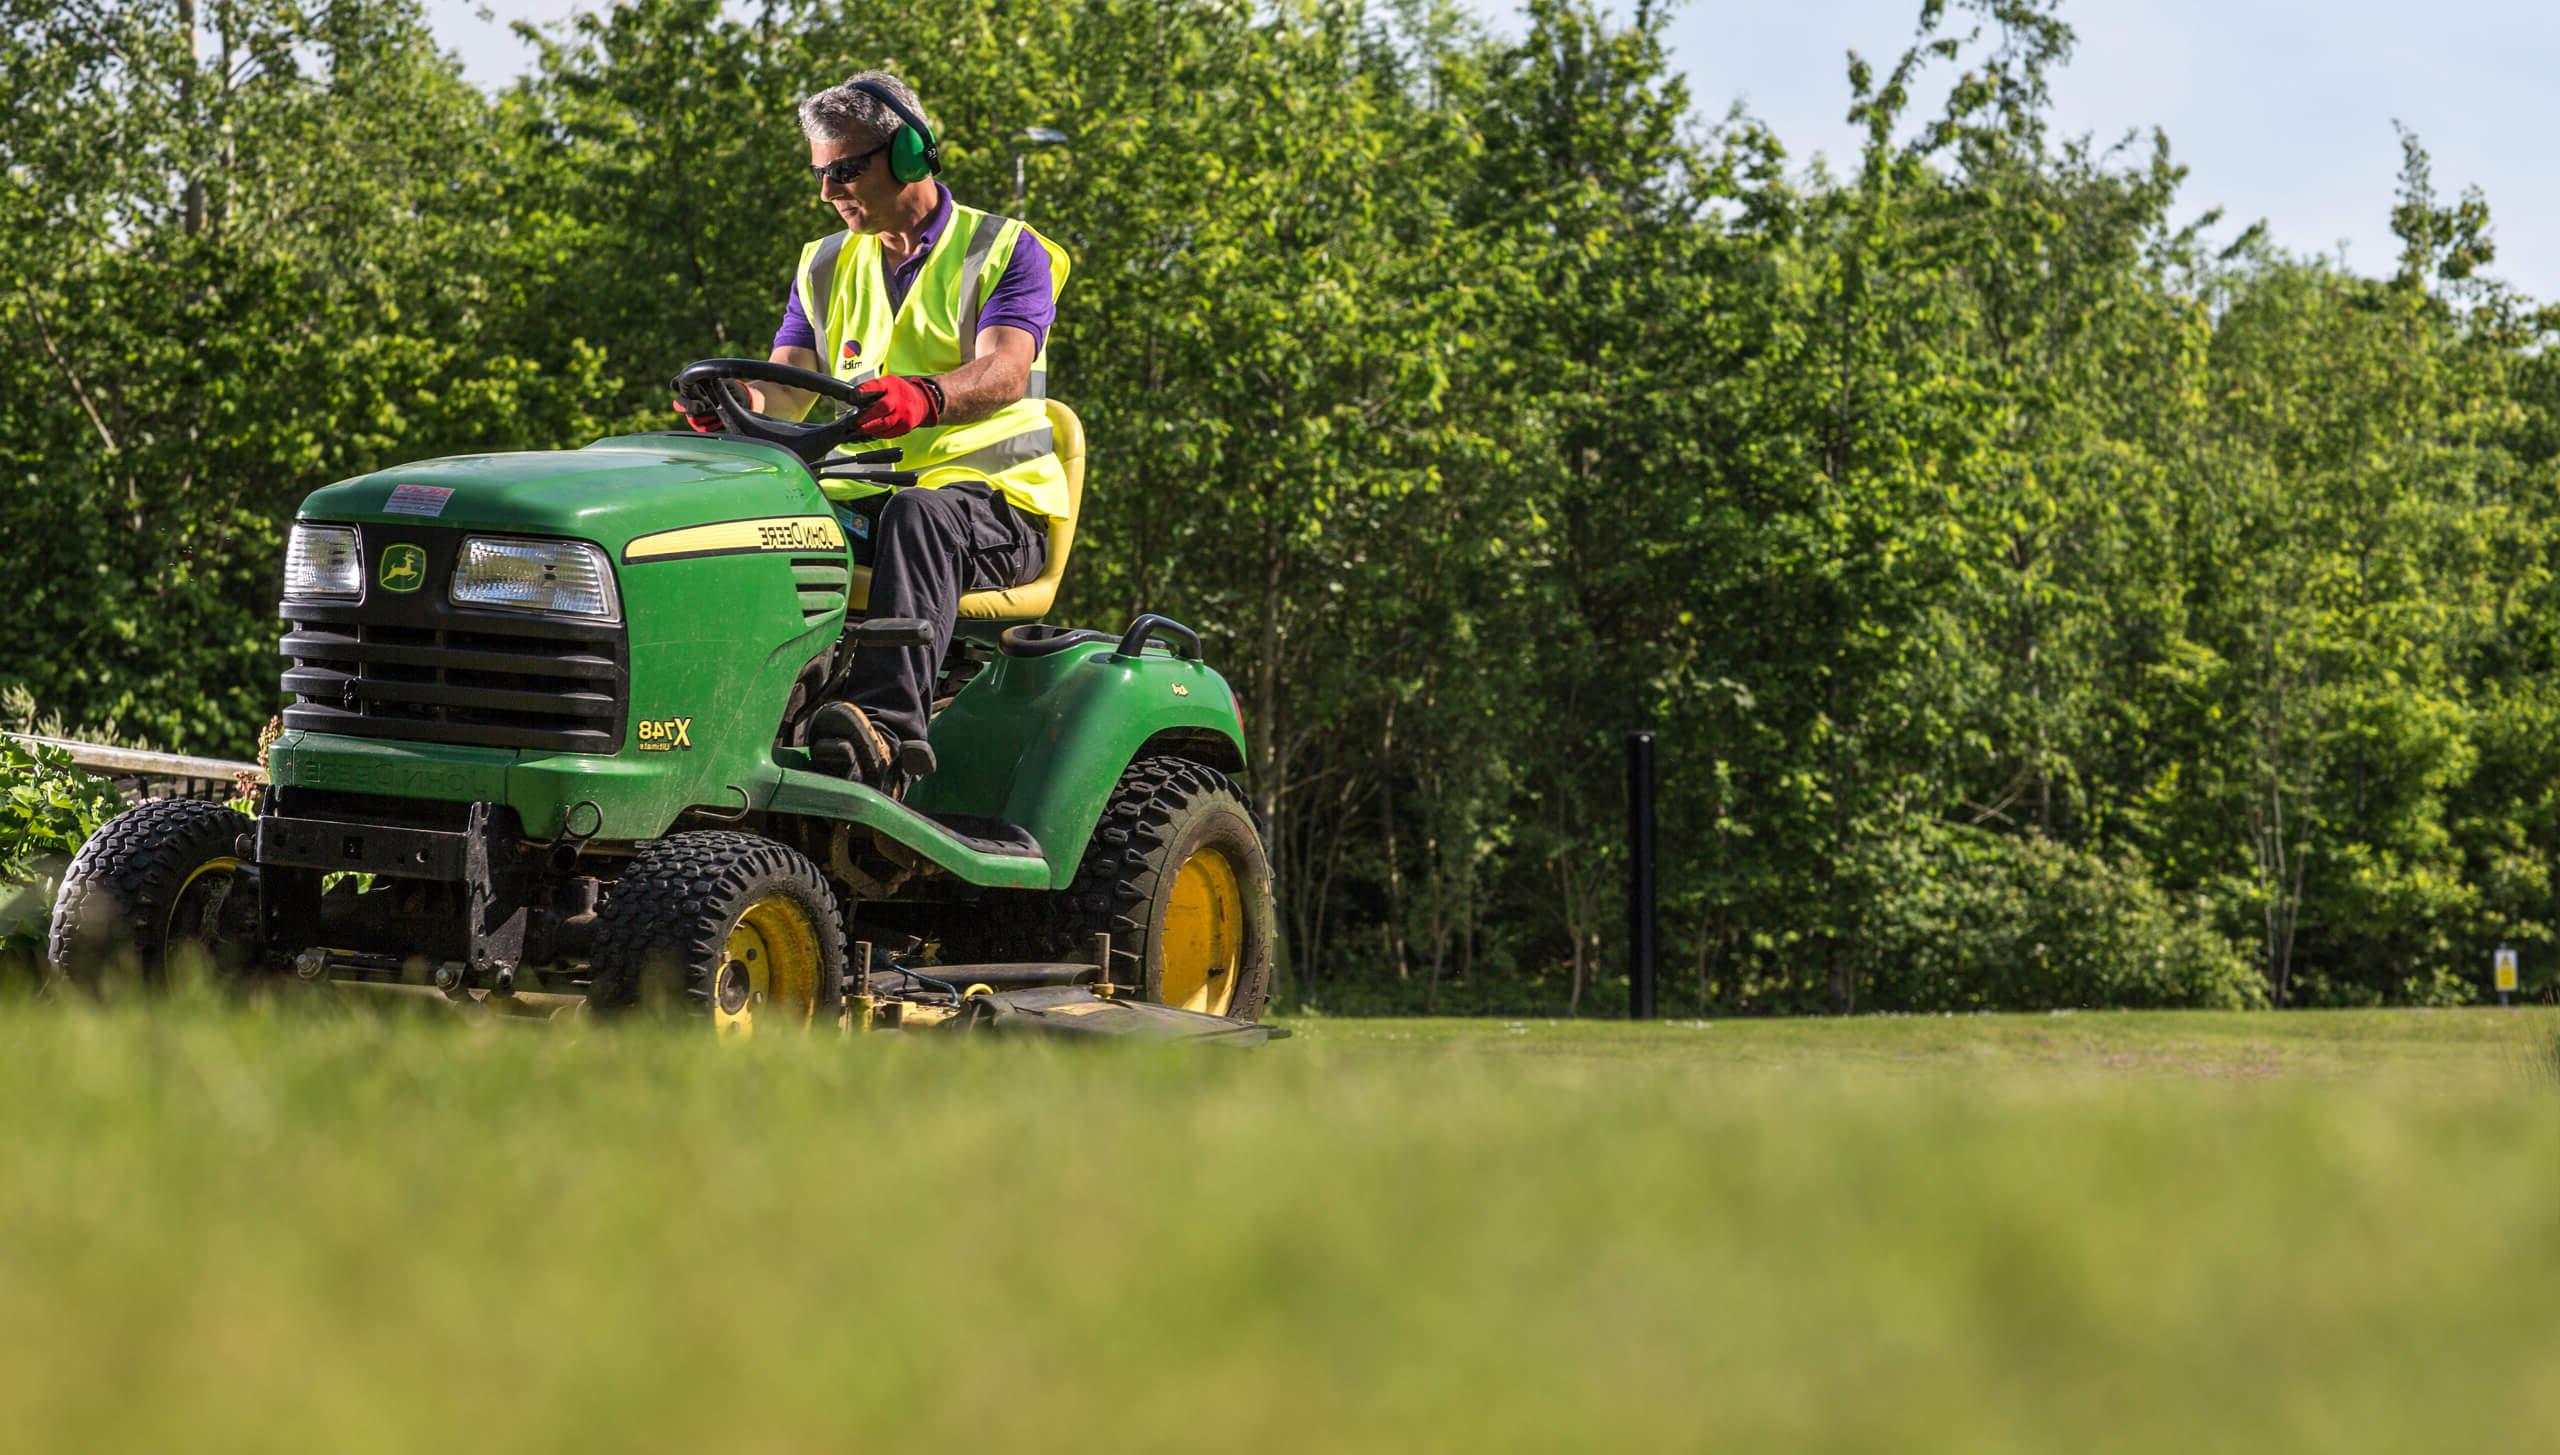 Mitie Landscaping employee on a ride-on mower